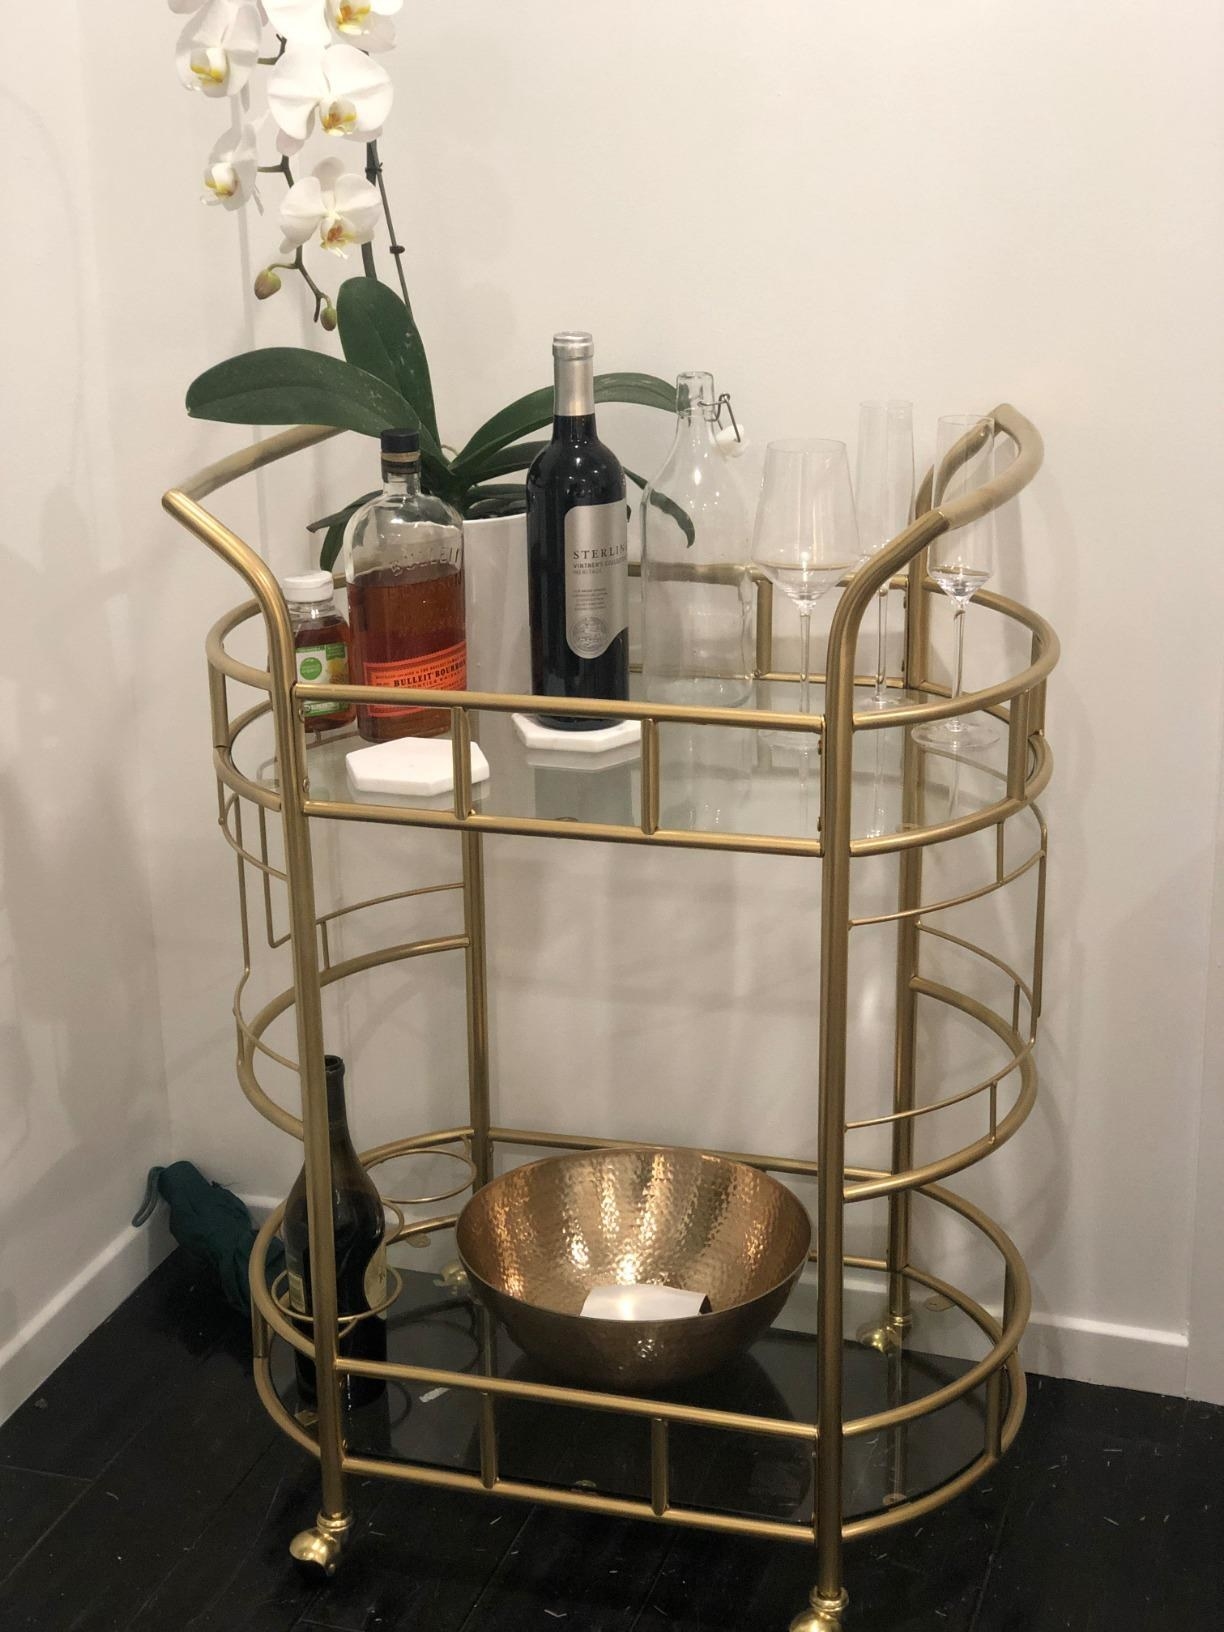 Reviewer pic of the oval-shaped bar cart in gold with assorted drinks and glasses on it